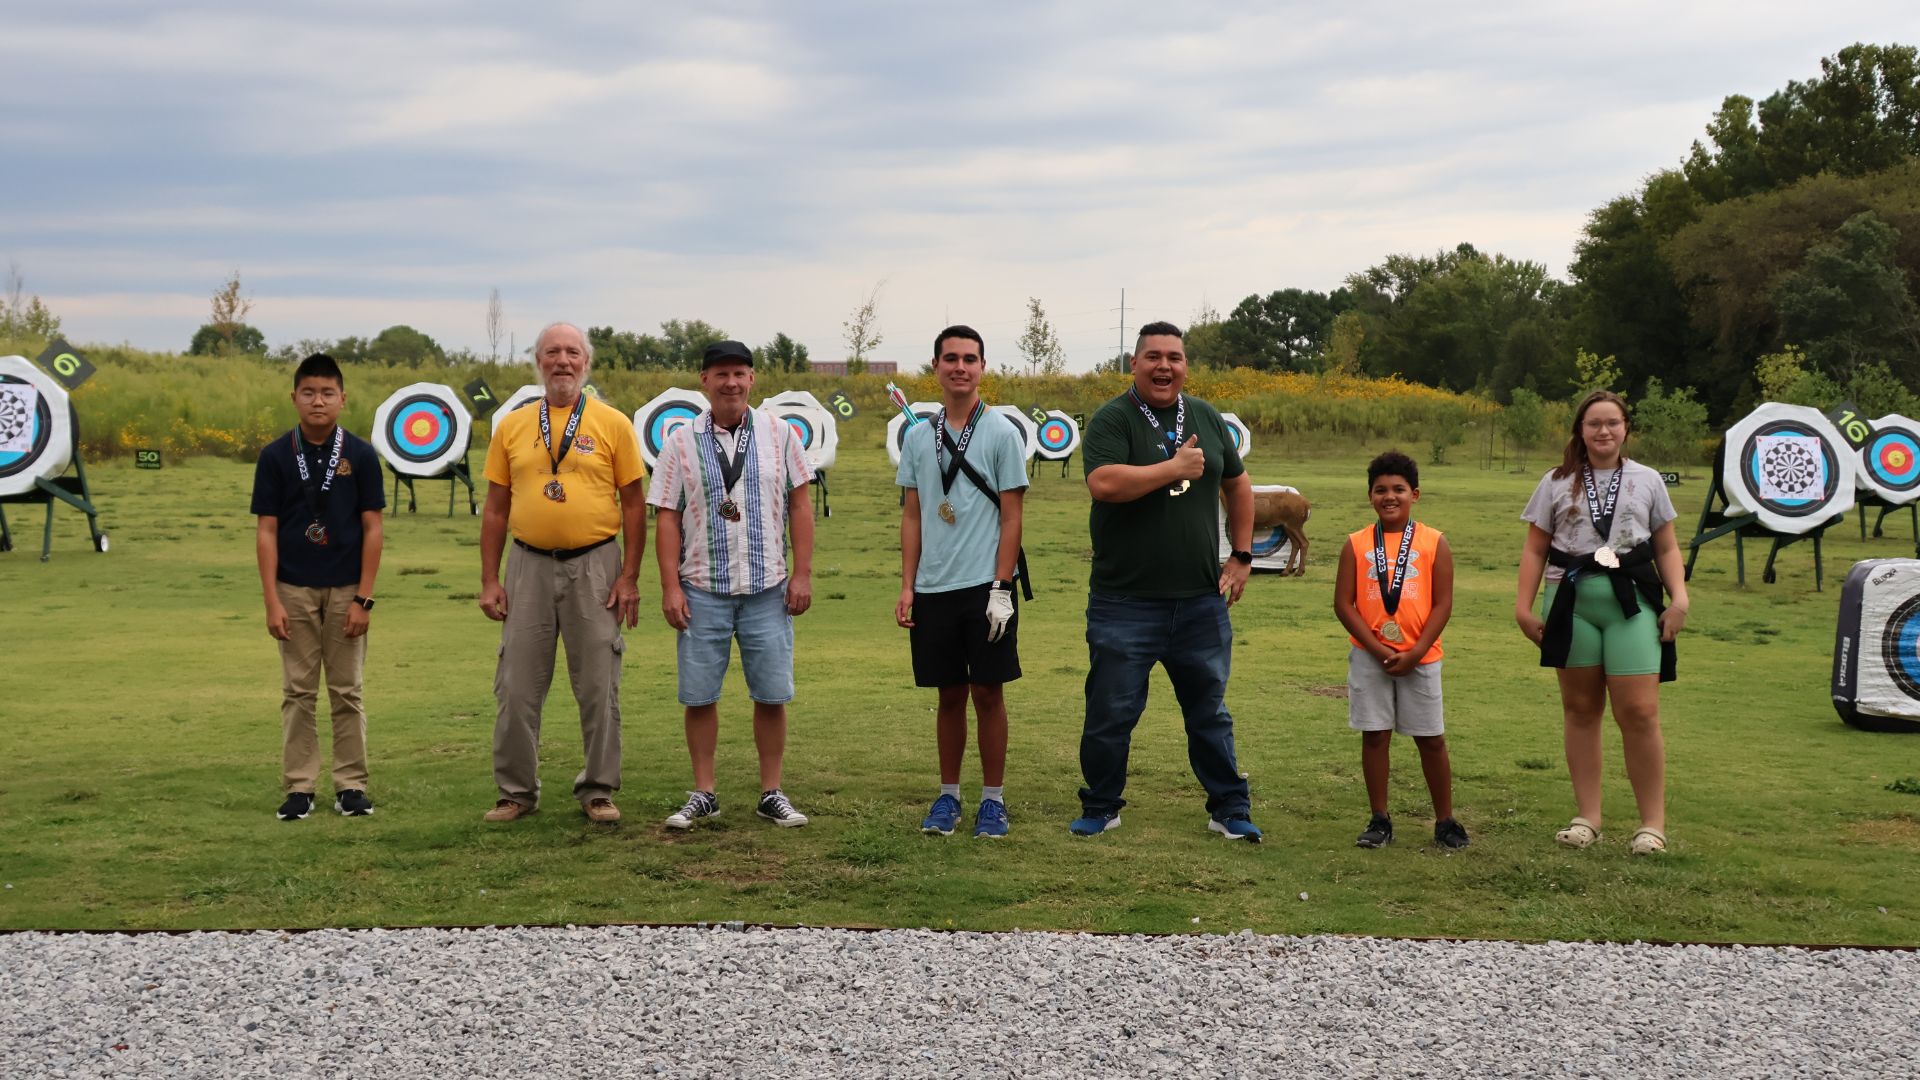 Group of Members at the Quiver Archery Range outdoors with bright targets behind them in bentonville, Ar